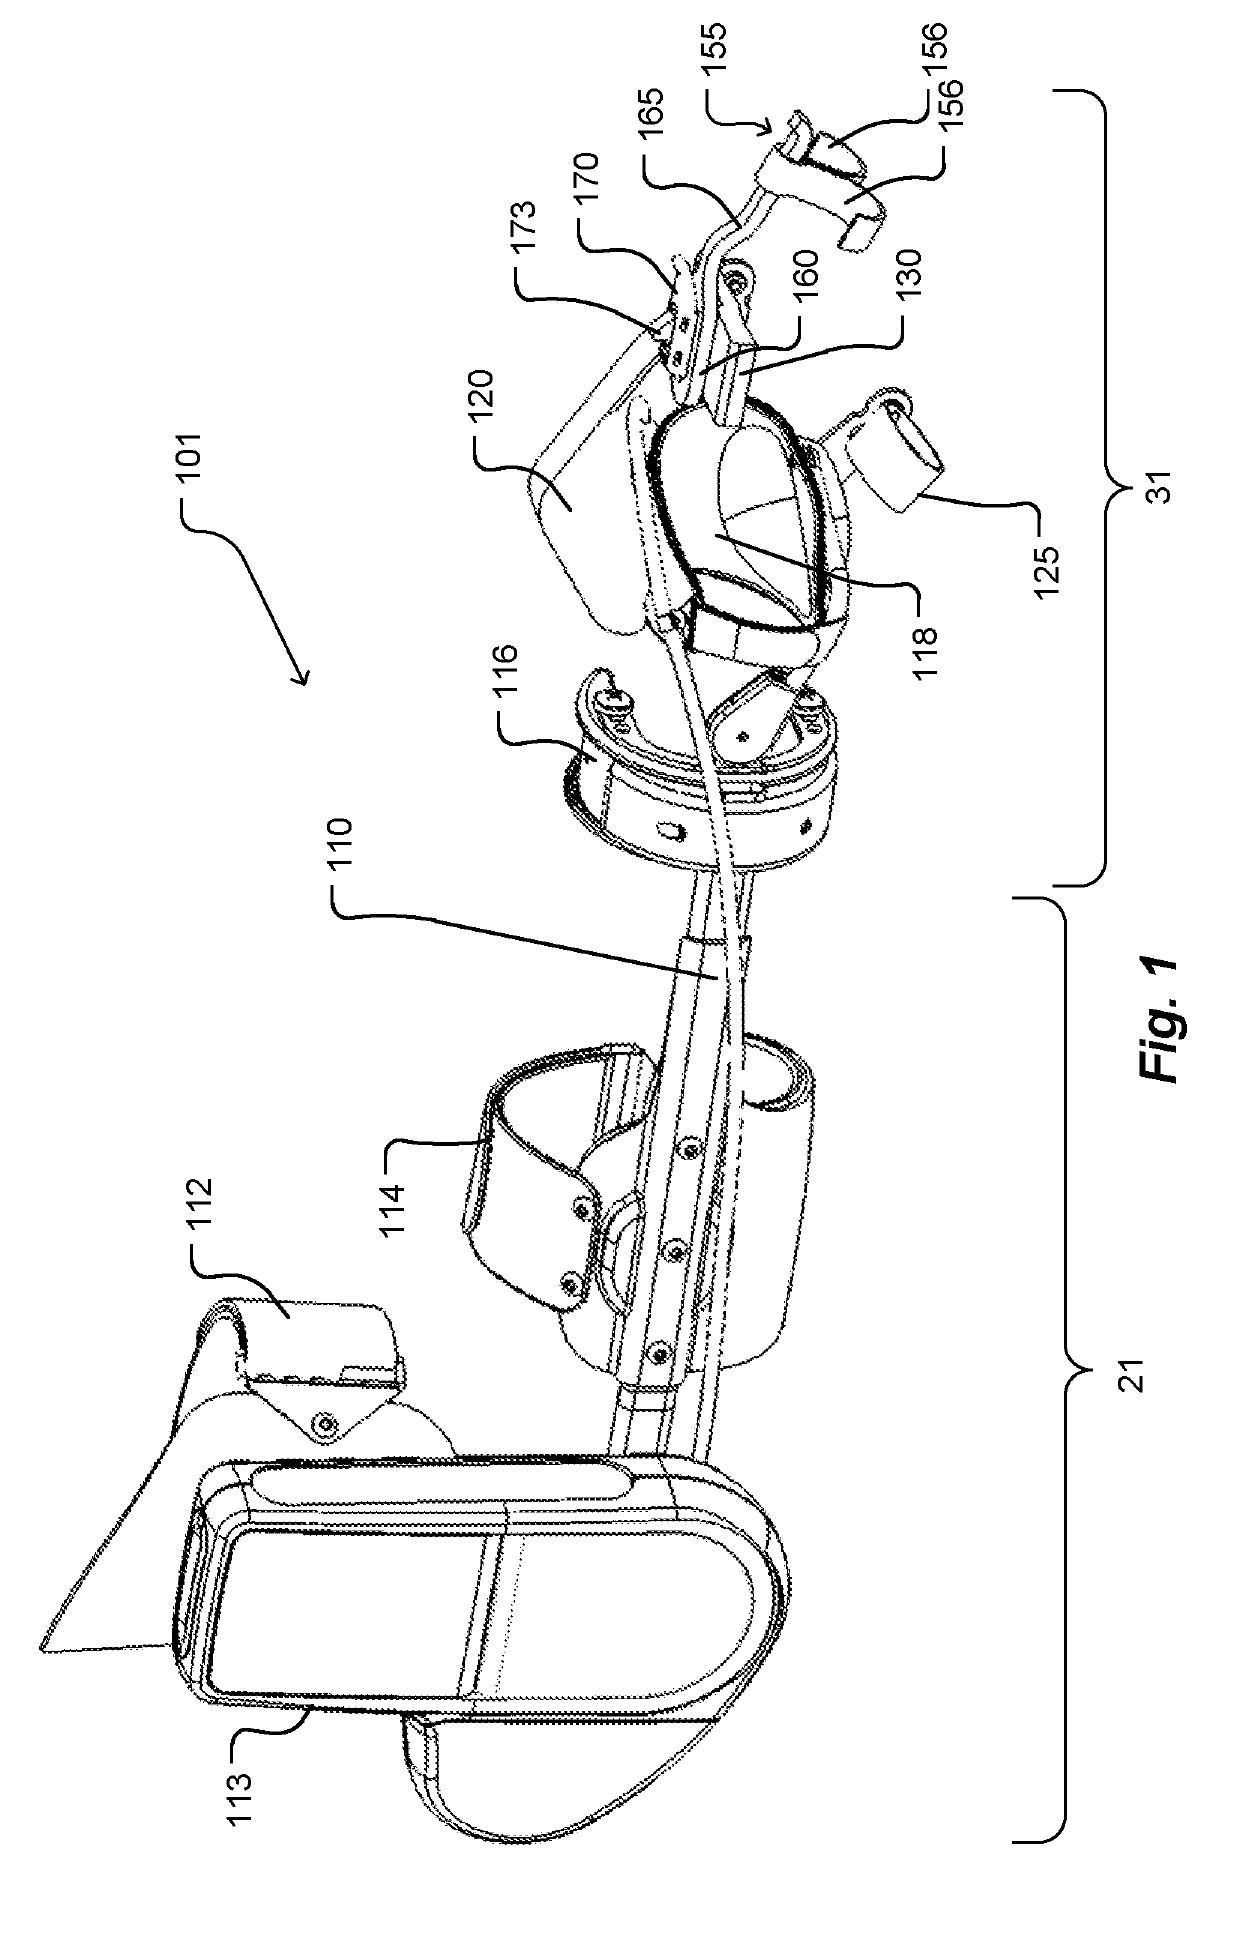 Self-Donning Powered Orthotic Device